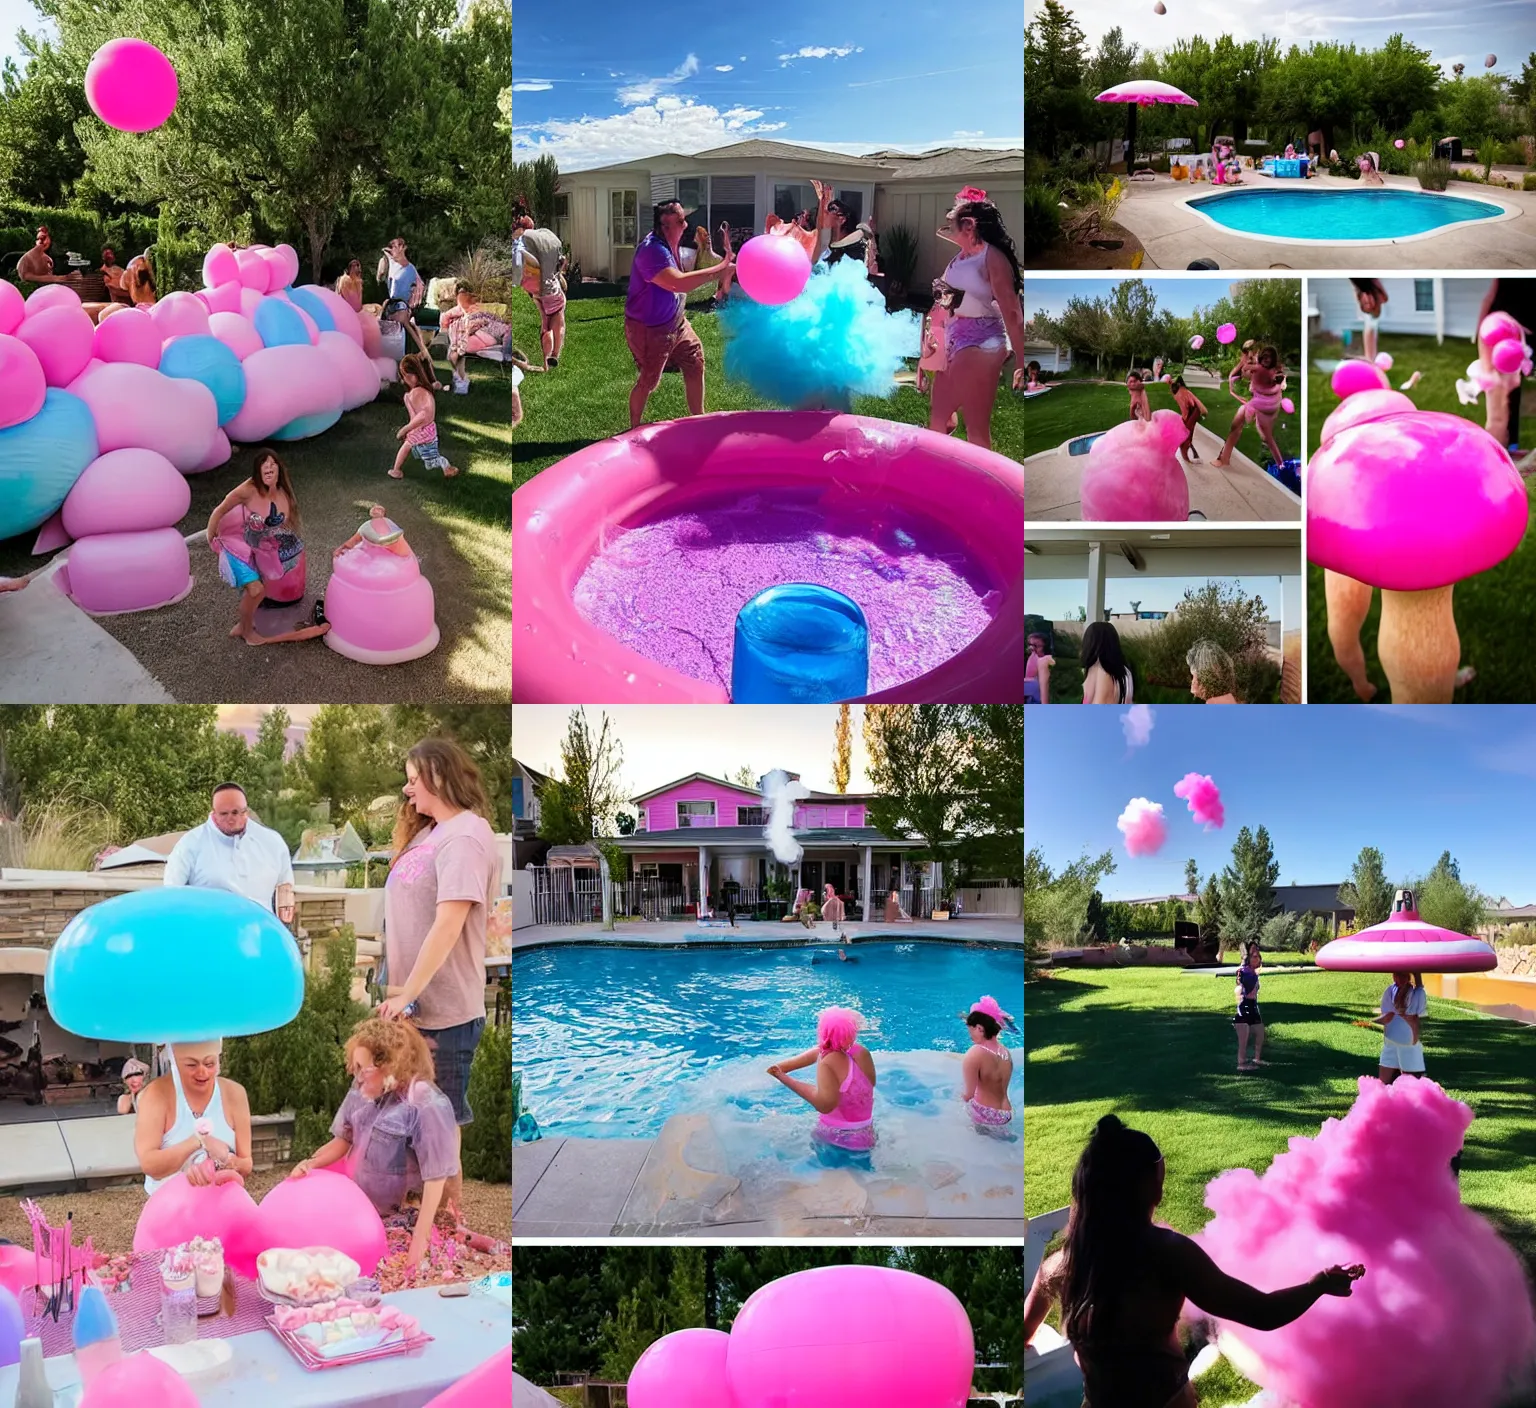 Prompt: gender reveal party at a suburban house in nevada :: bbq and pool :: people playing in pink water :: a large pink mushroom cloud is visible on the horizon :: clear blue sky :: mood is excess, celebration, absurd, surreal